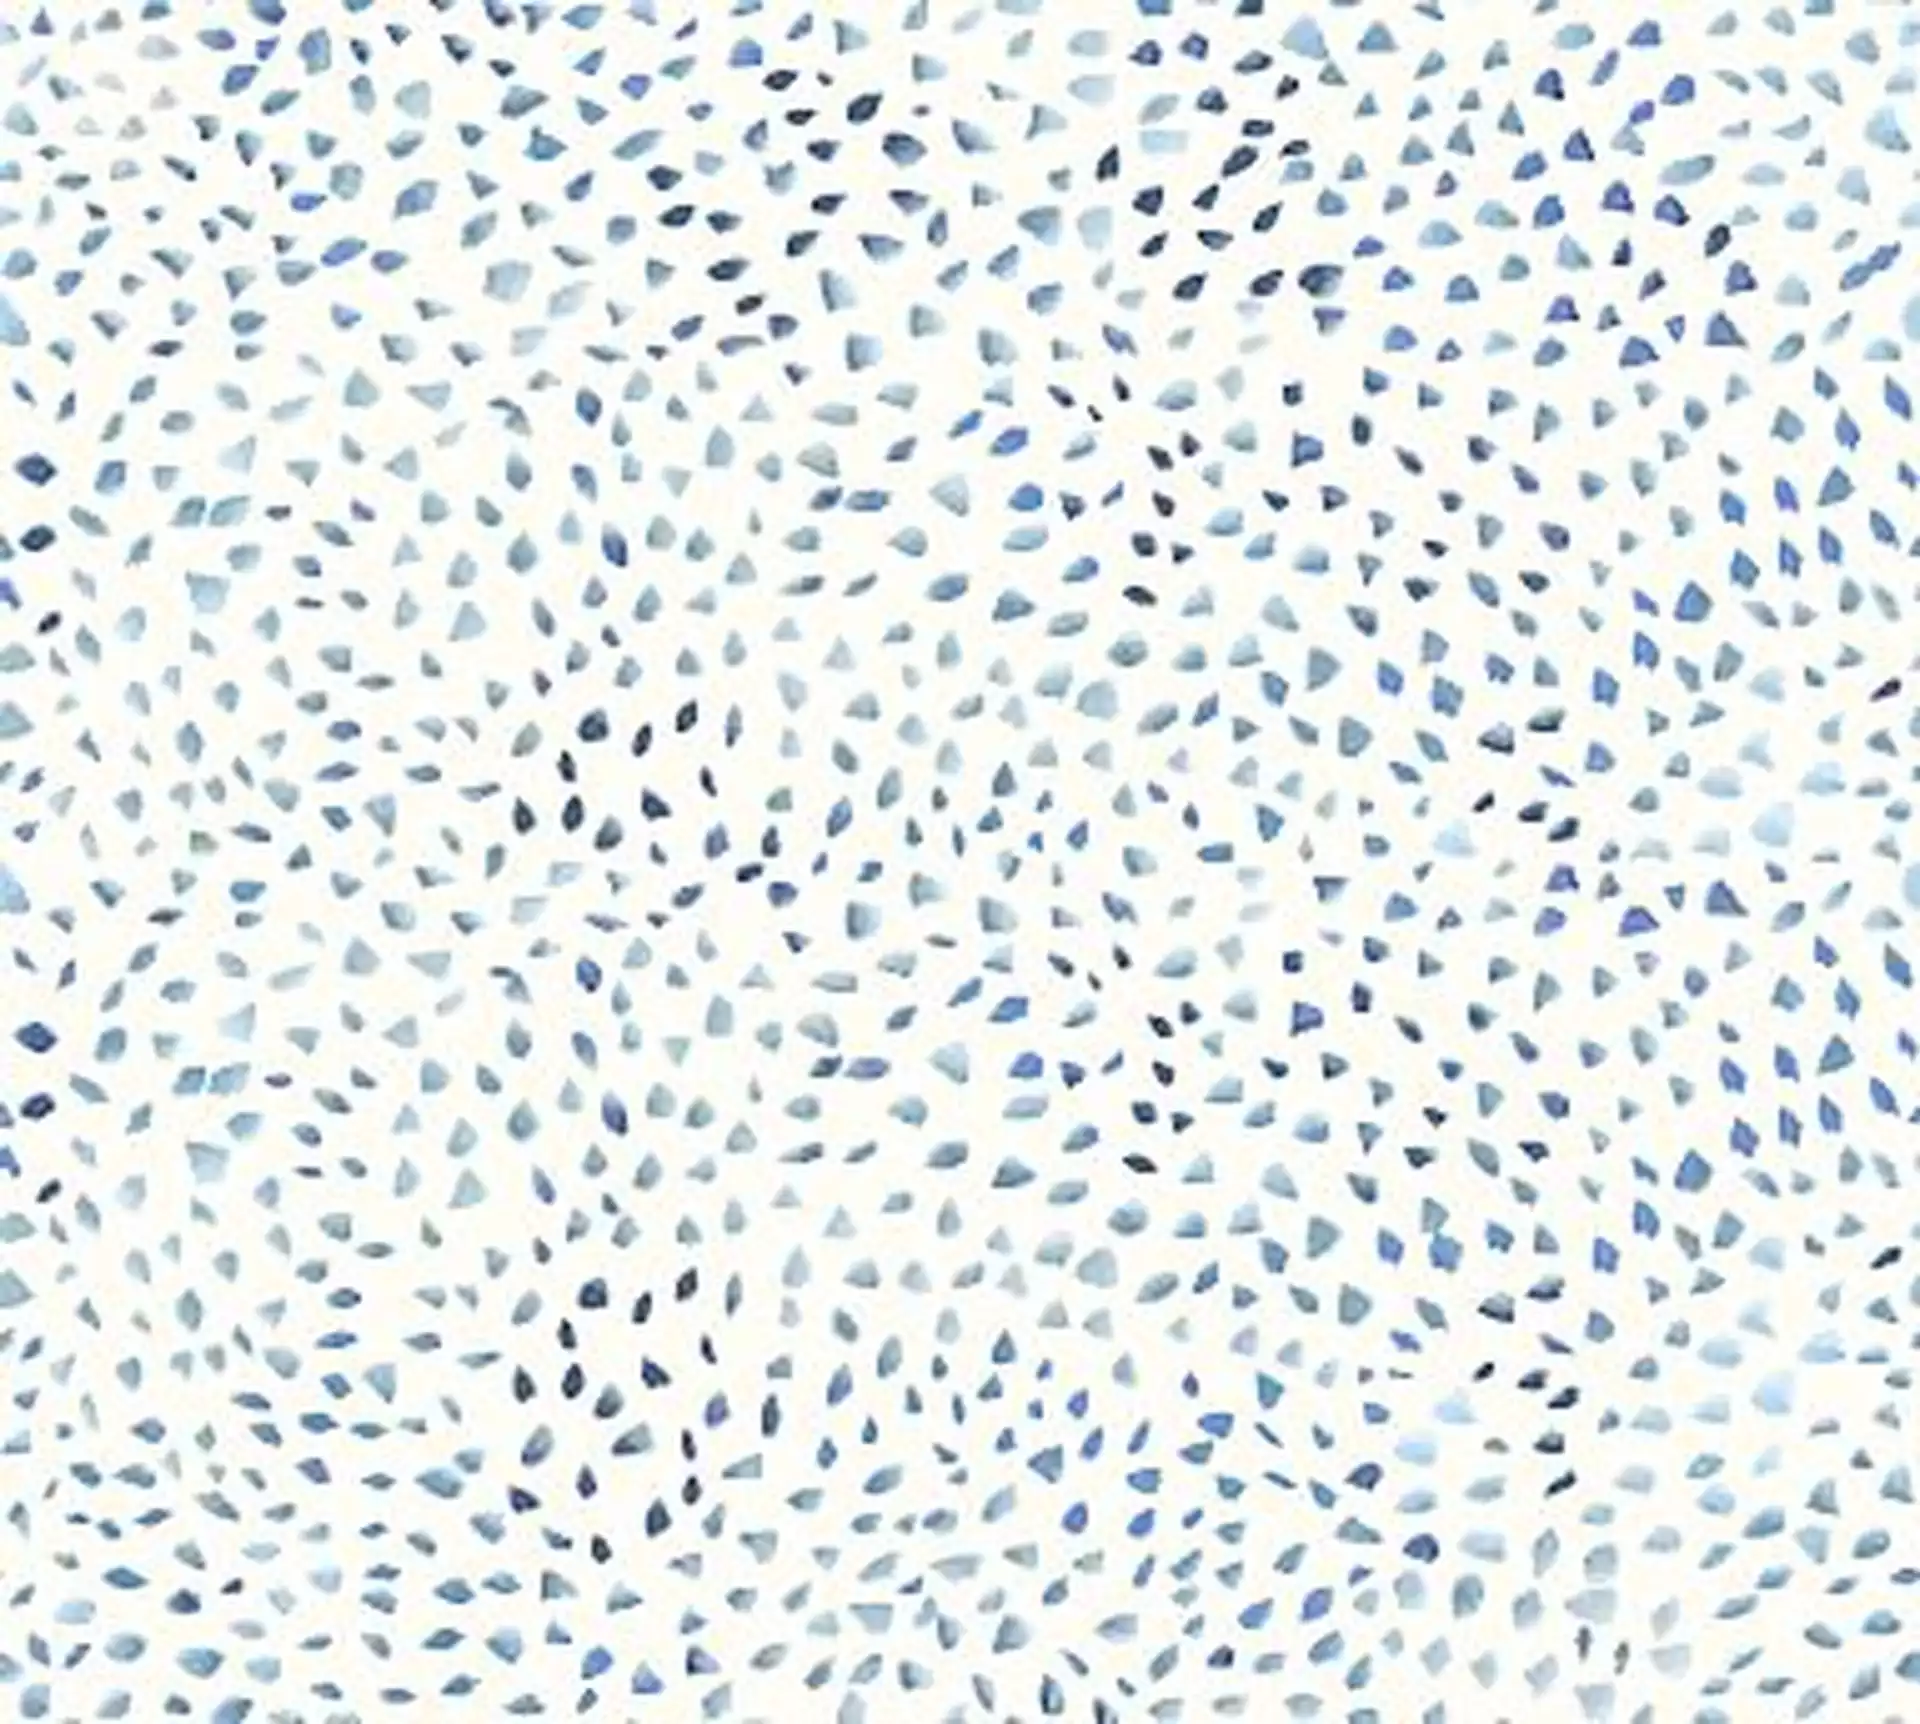 Flurry Rebecca Atwood Removable Wallpaper, Blue, 2' x 8'